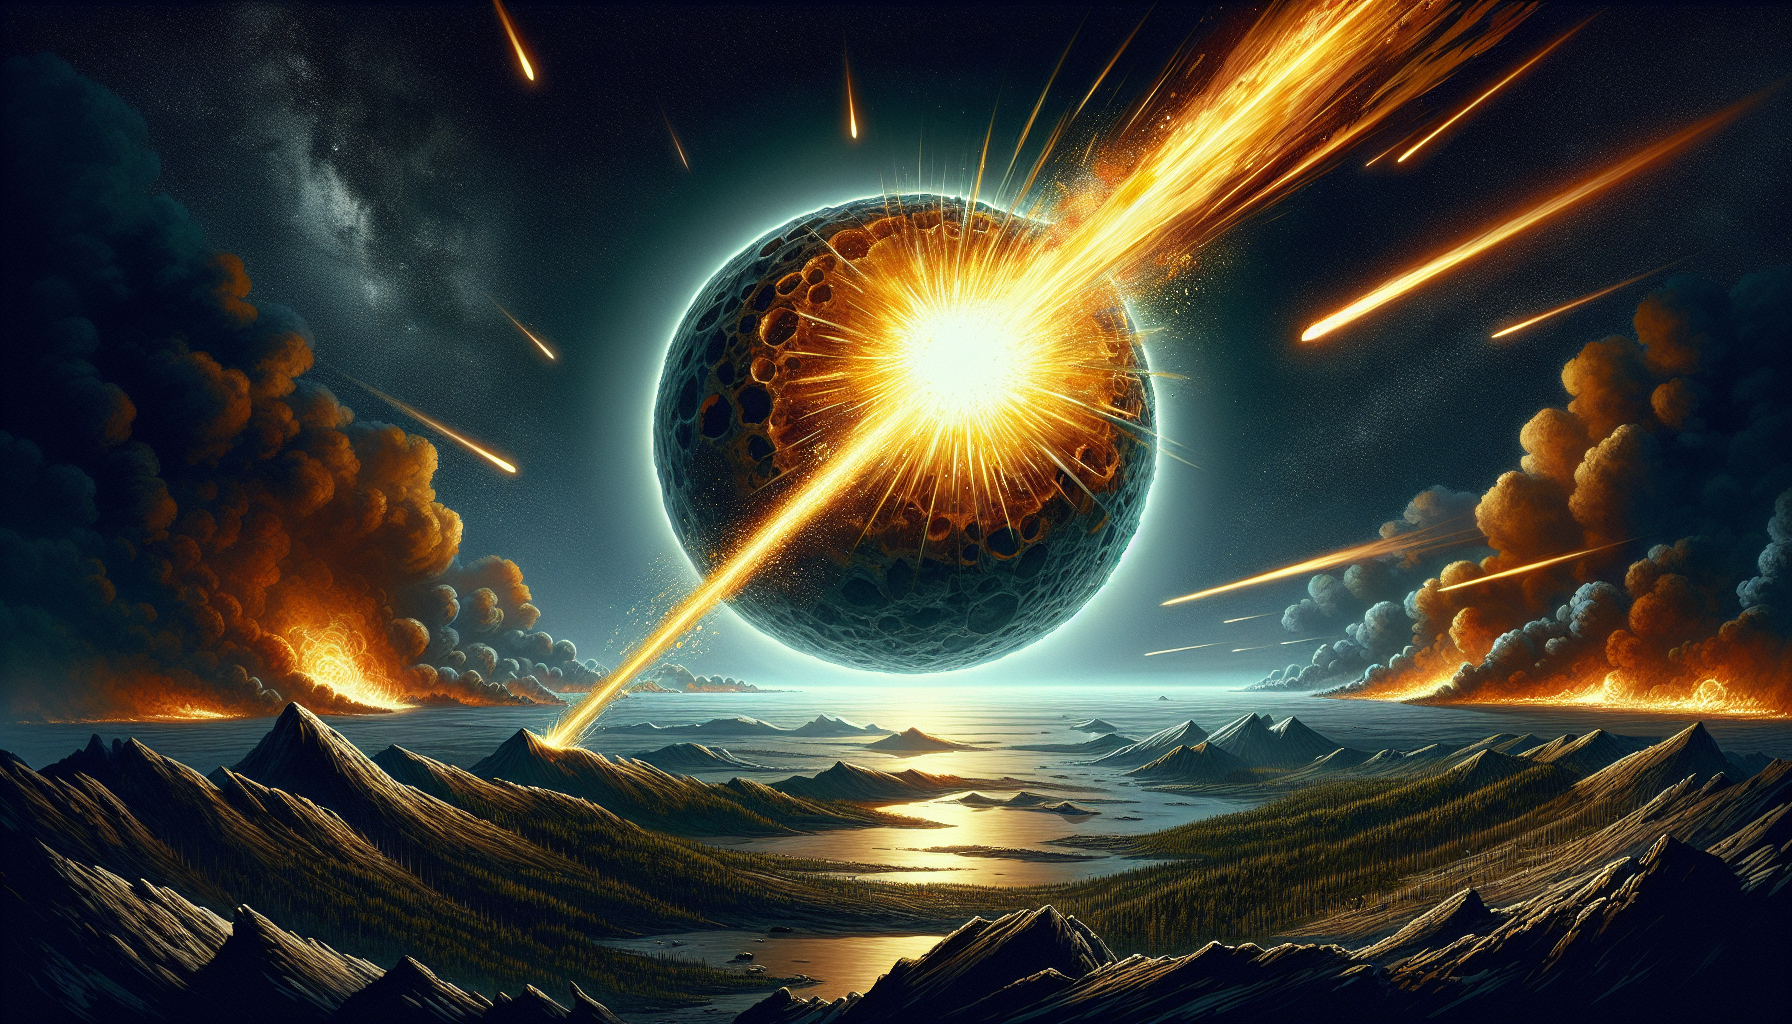 Illustration of a meteorite colliding with Earth 15 million years ago